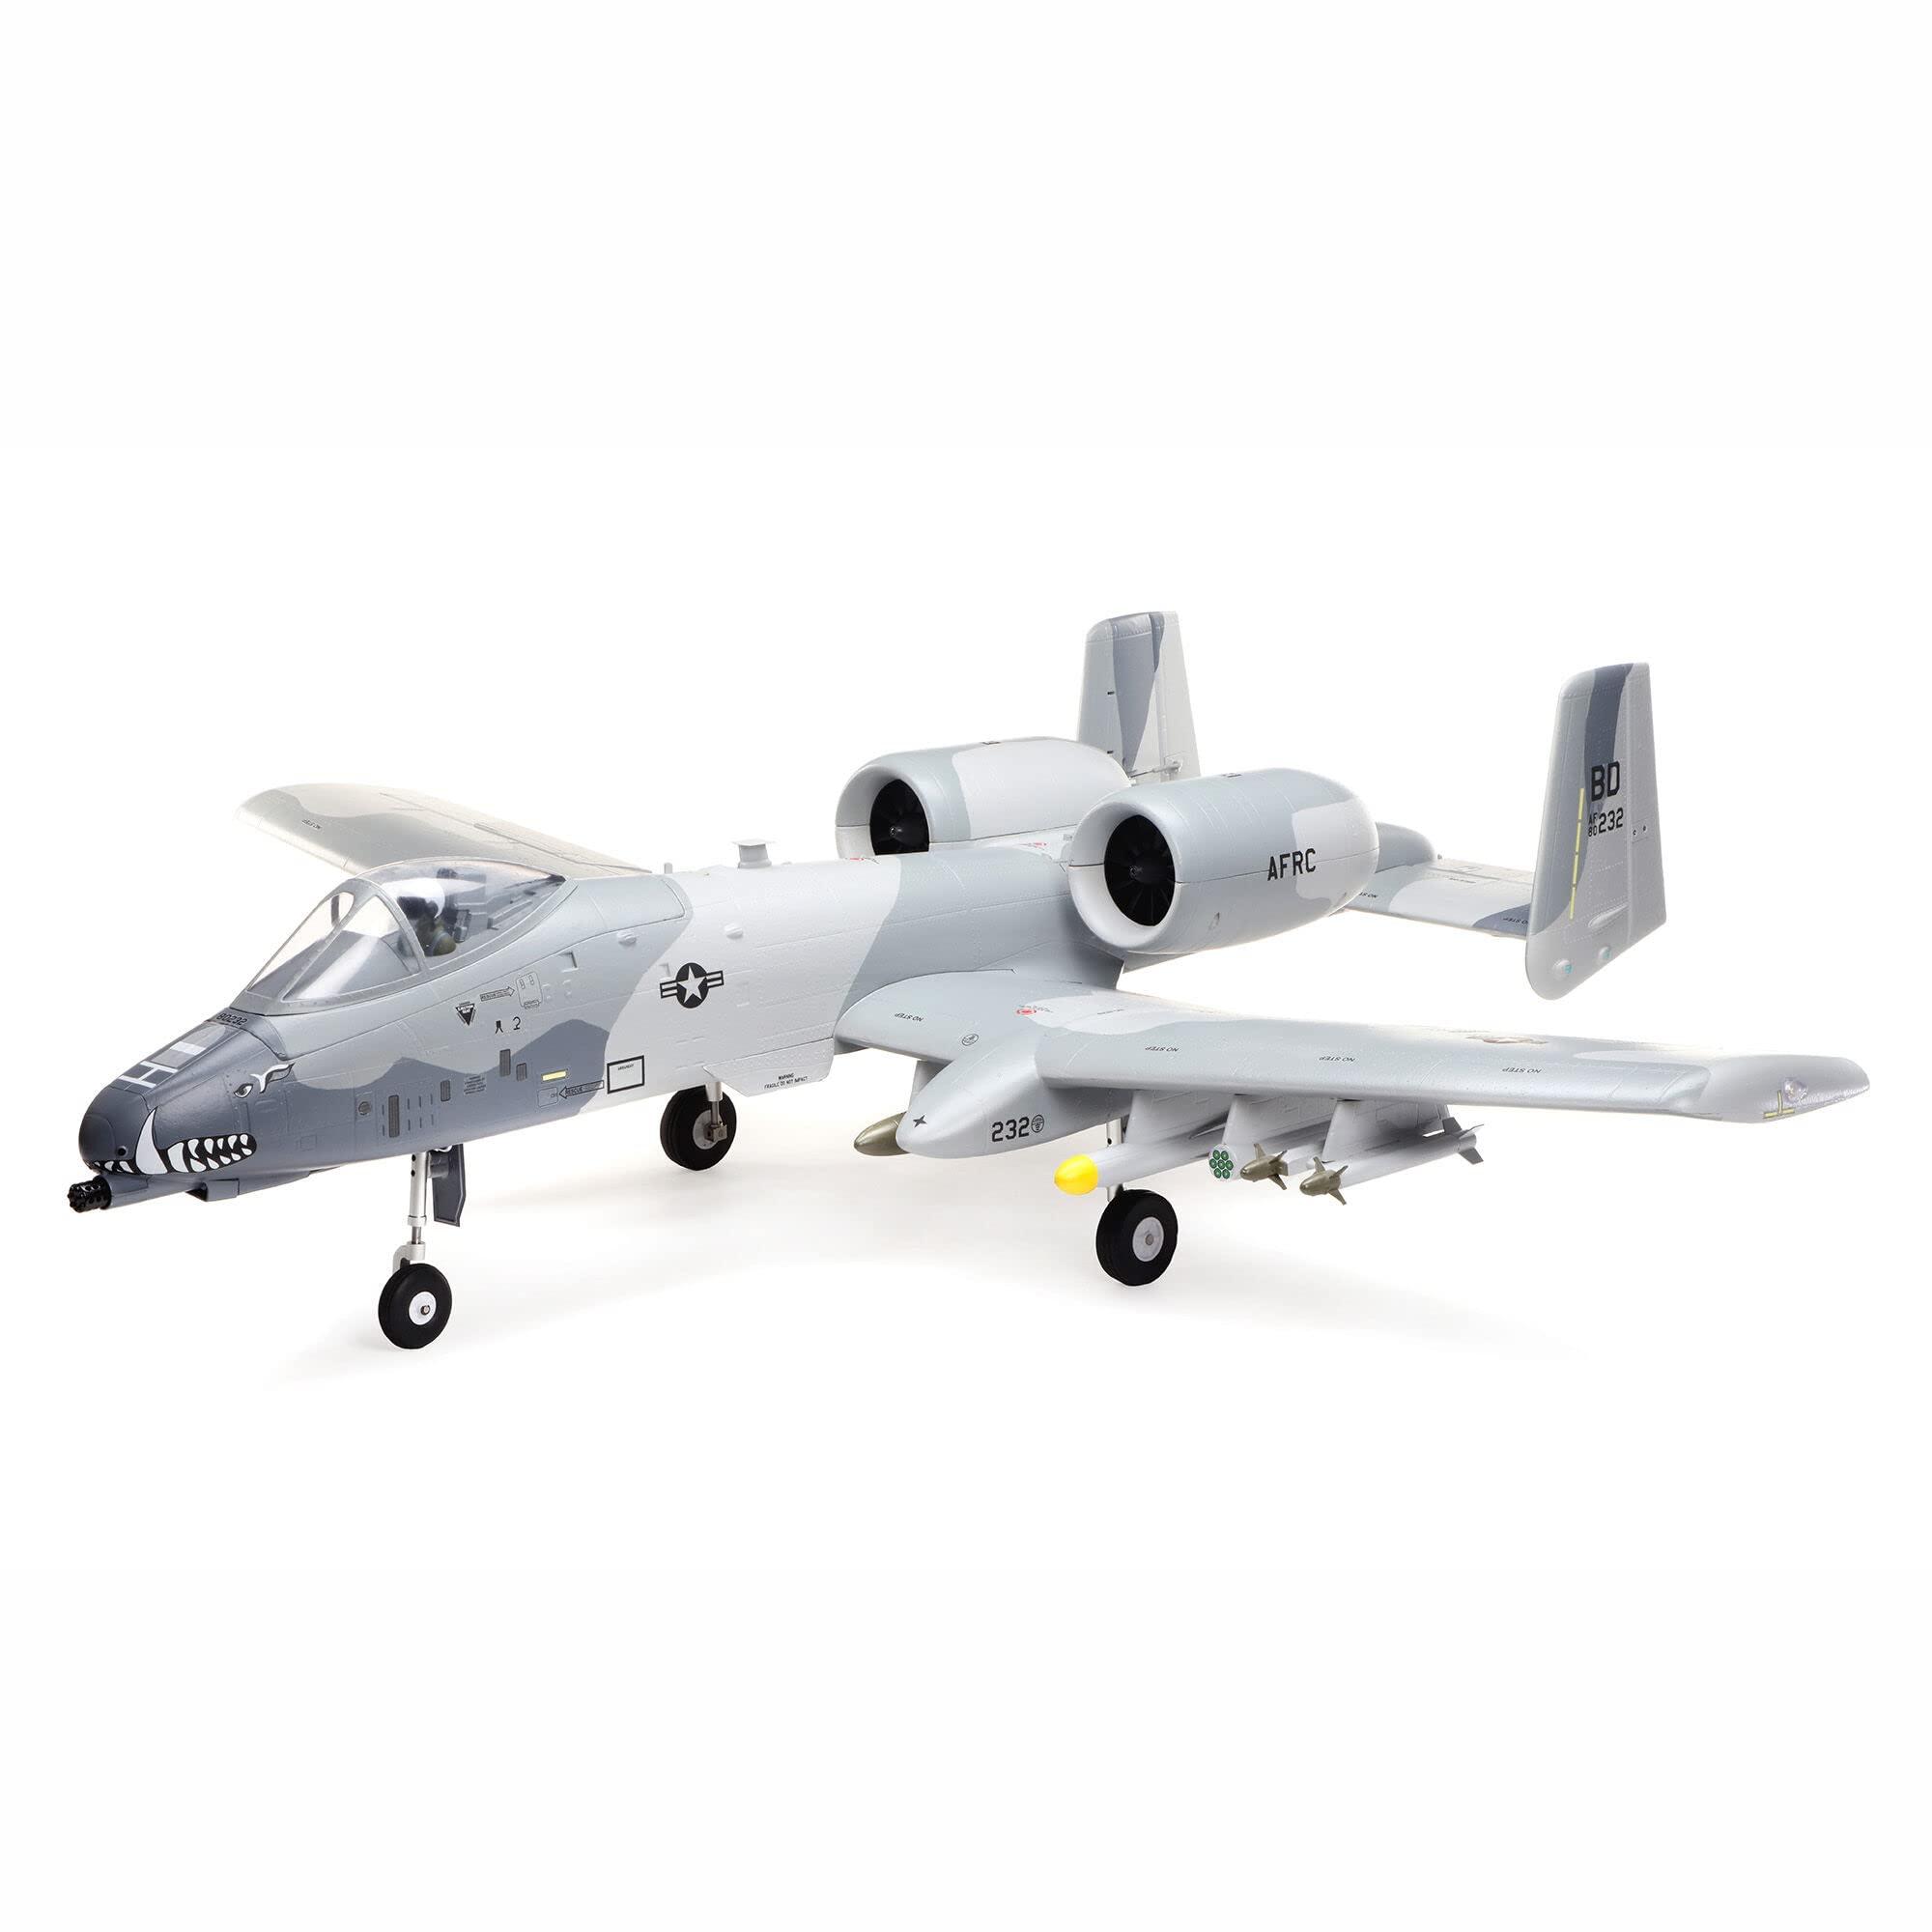 A 10 Thunderbolt Rc Plane: Consider These Factors Before Buying